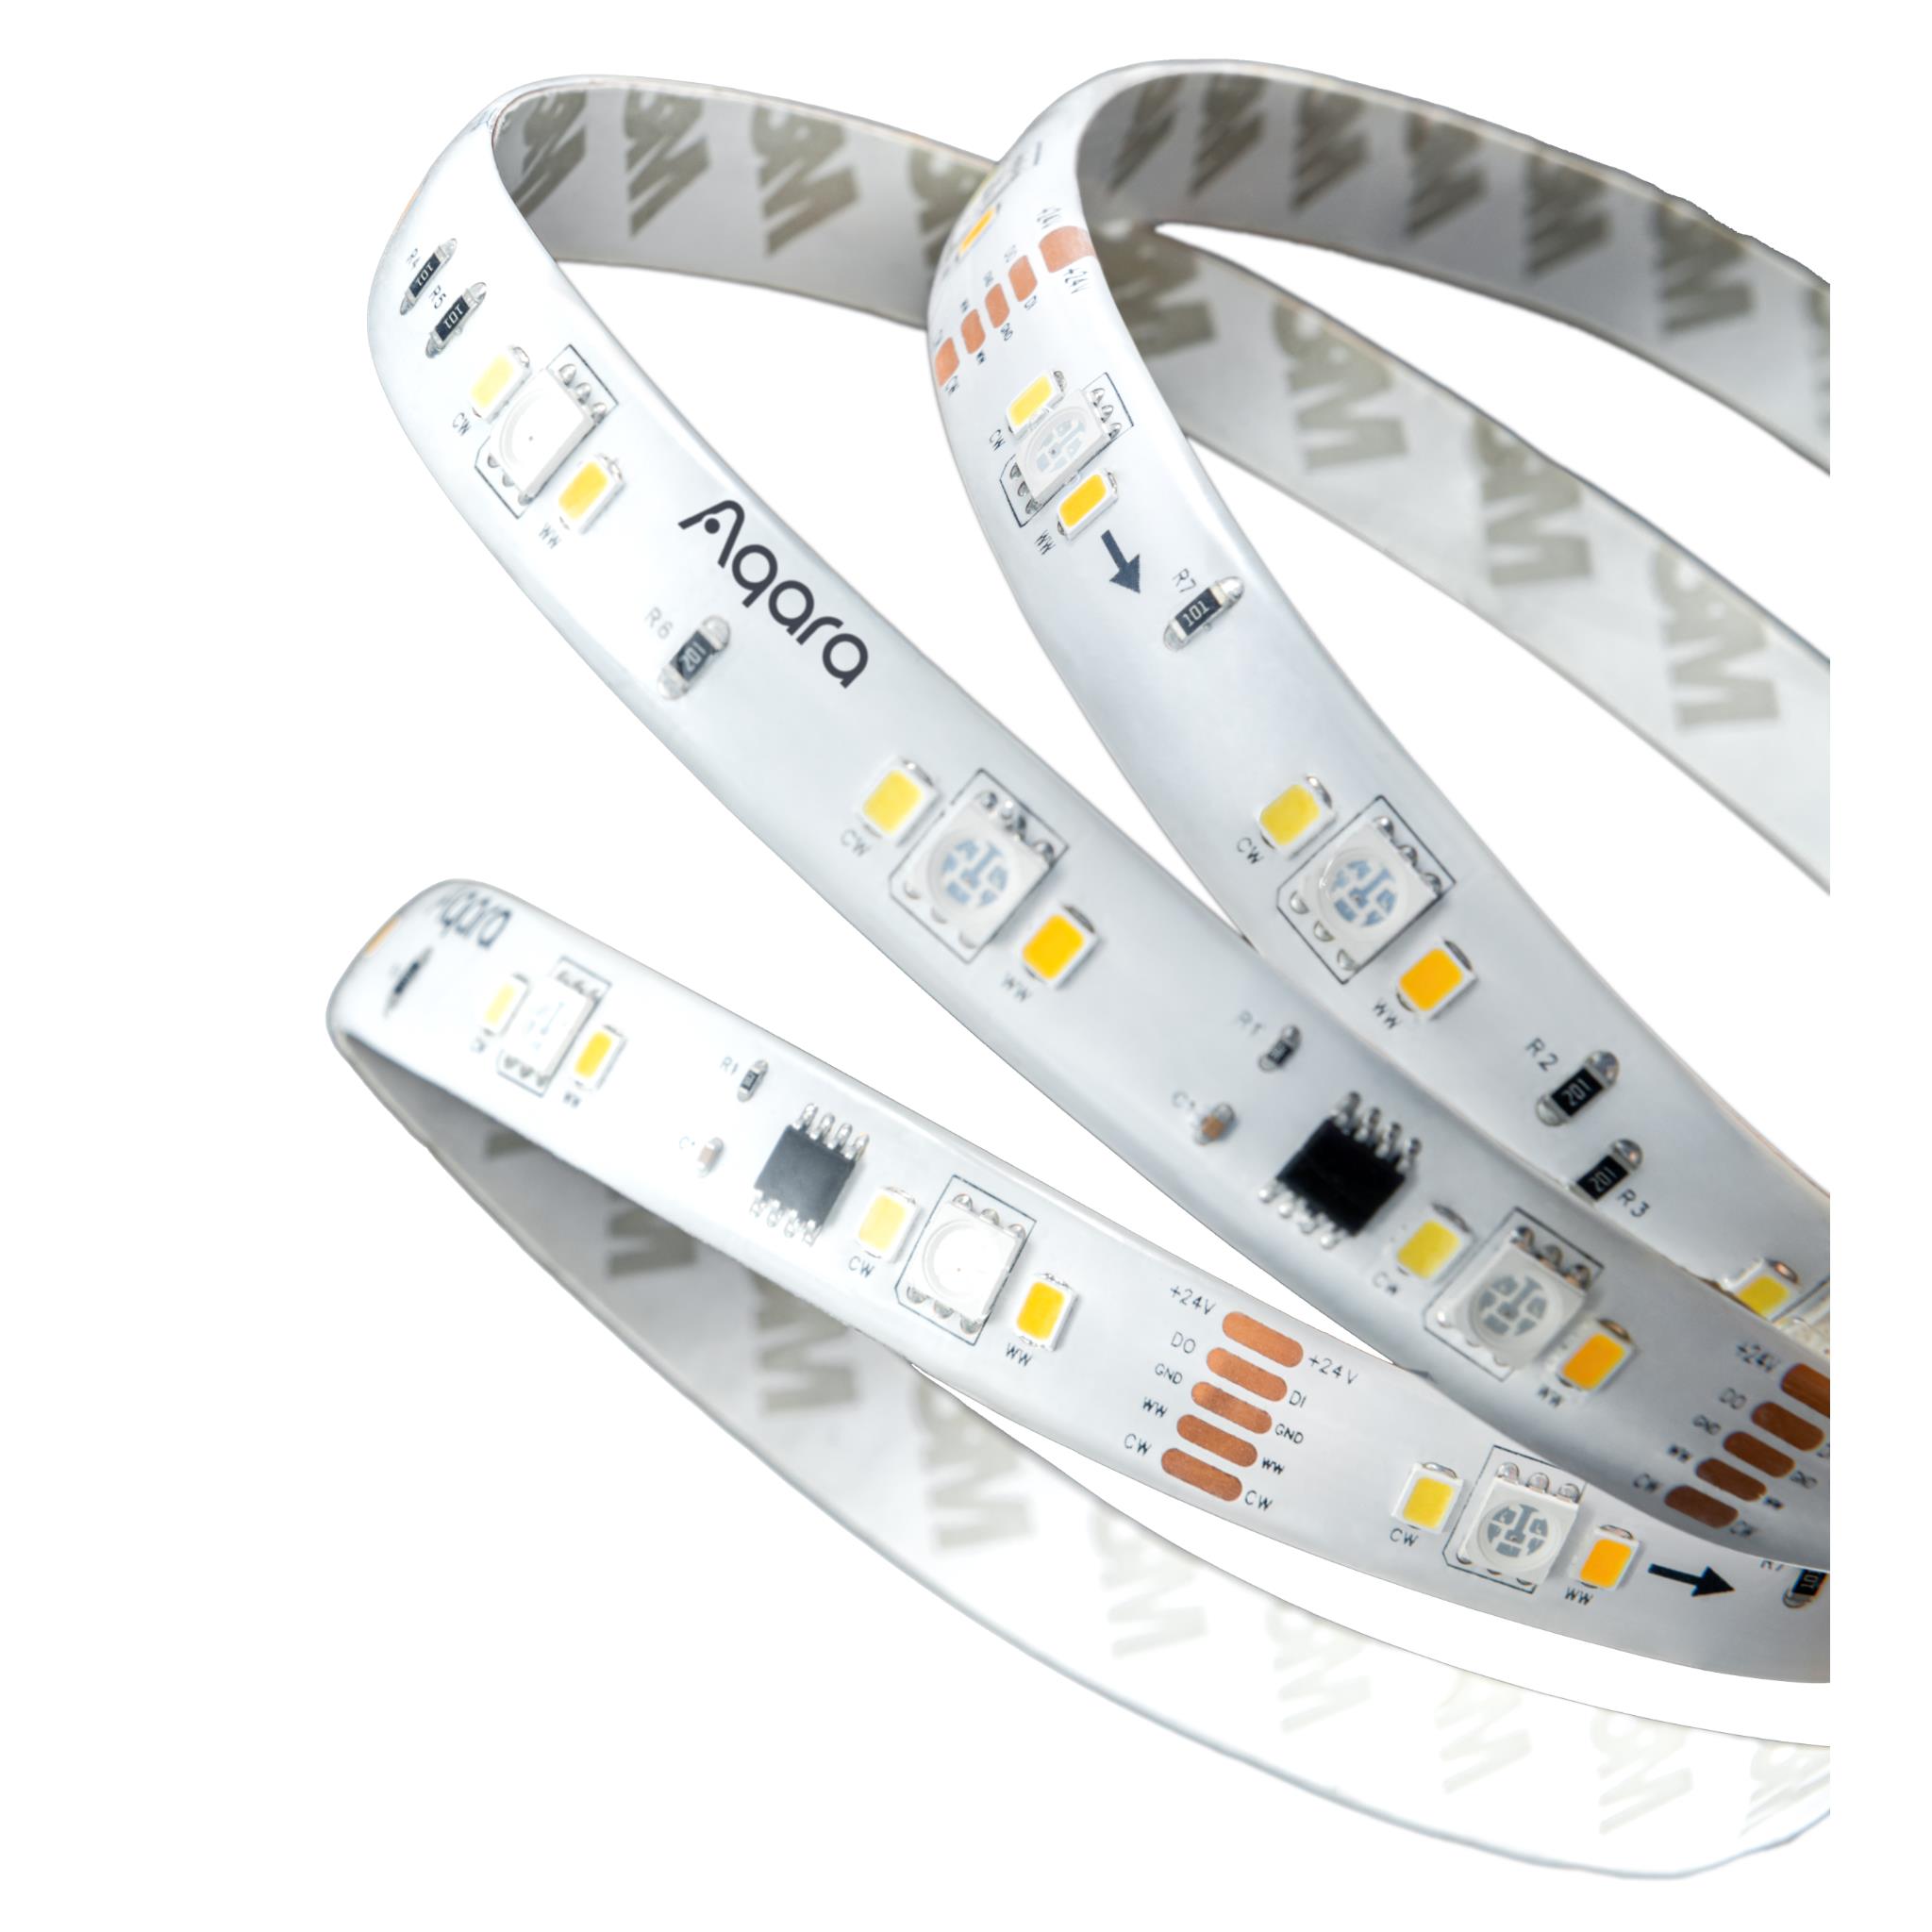  Aqara LED Strip T1 with Matter, Requires Zigbee 3.0 HUB, 6.5 FT  RGB+IC LED Strip Lights with 16 Million Colors/Tunable White/Gradient  Effects, Supports Apple Home and Alexa : Tools & Home